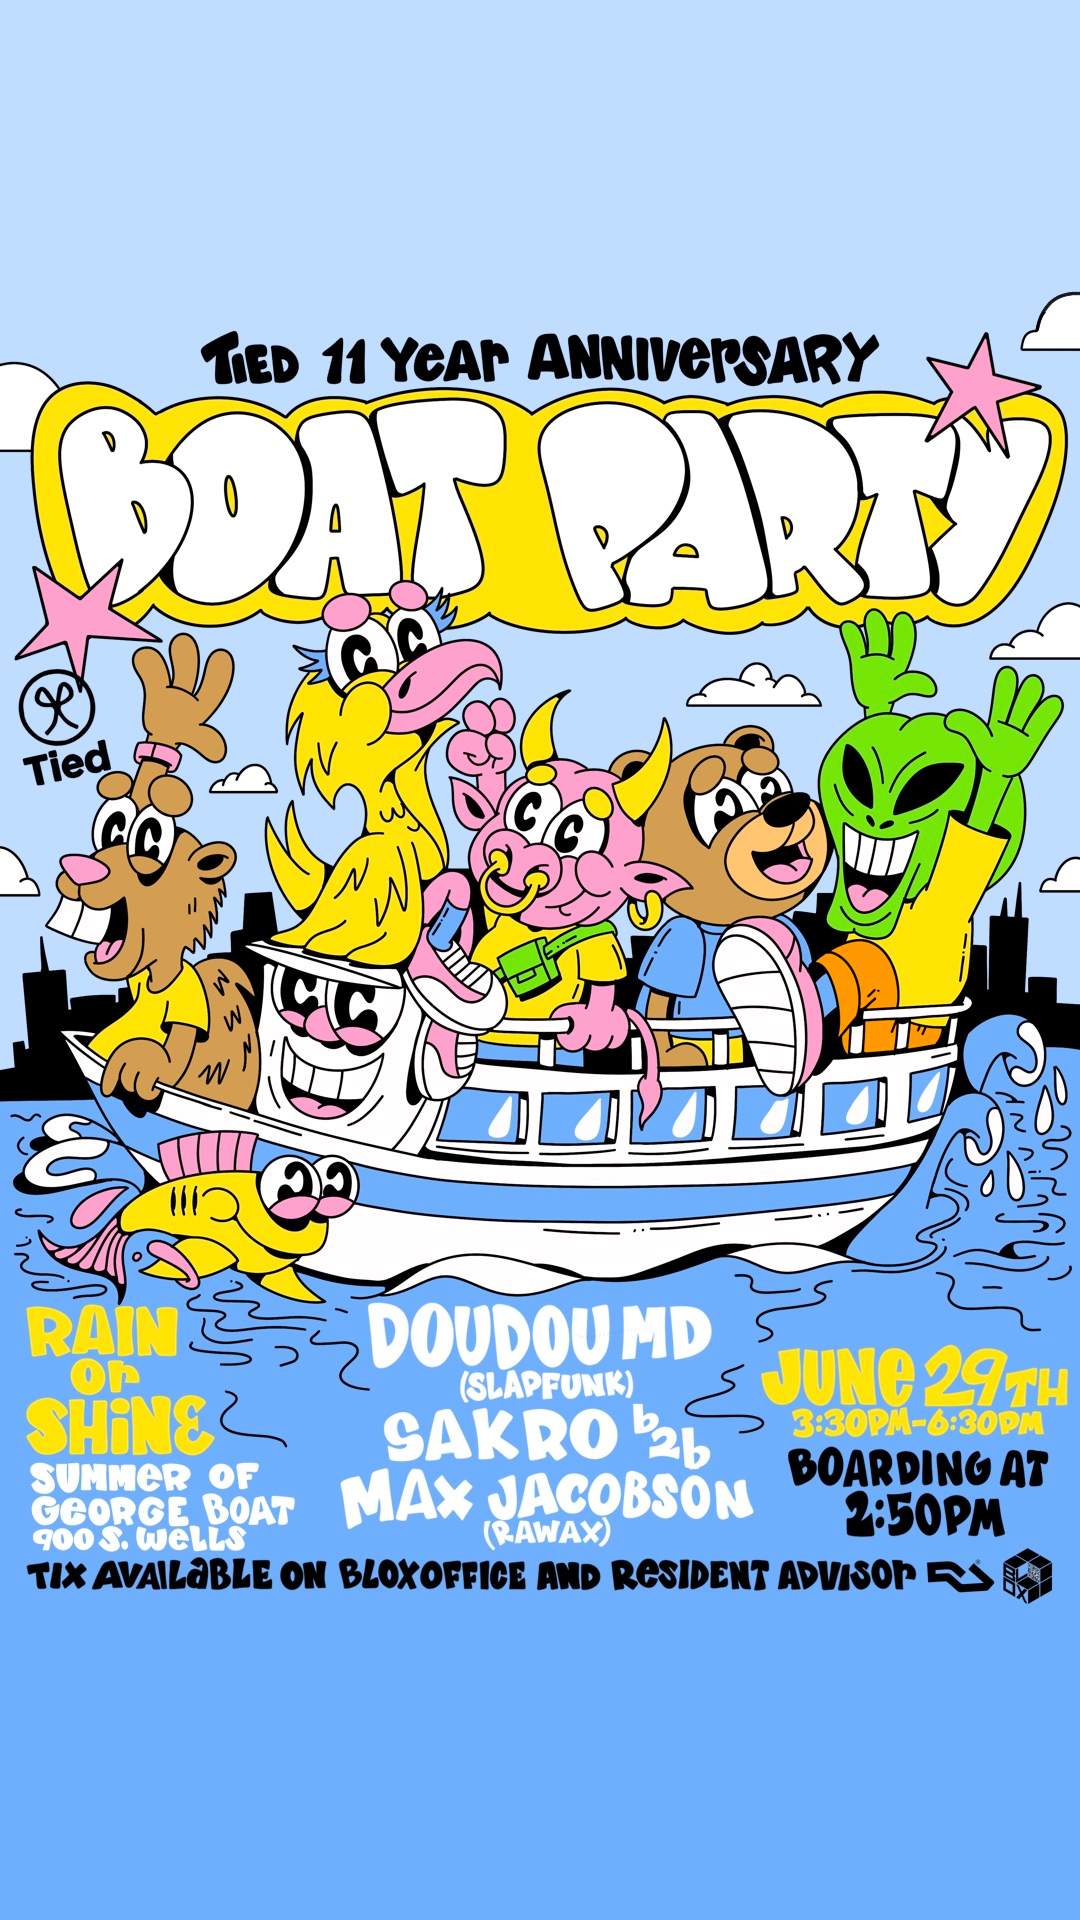 Tied 11 Year Anniversary Boat Party with Doudou MD, Sakro b2b Max Jacobson - Página frontal